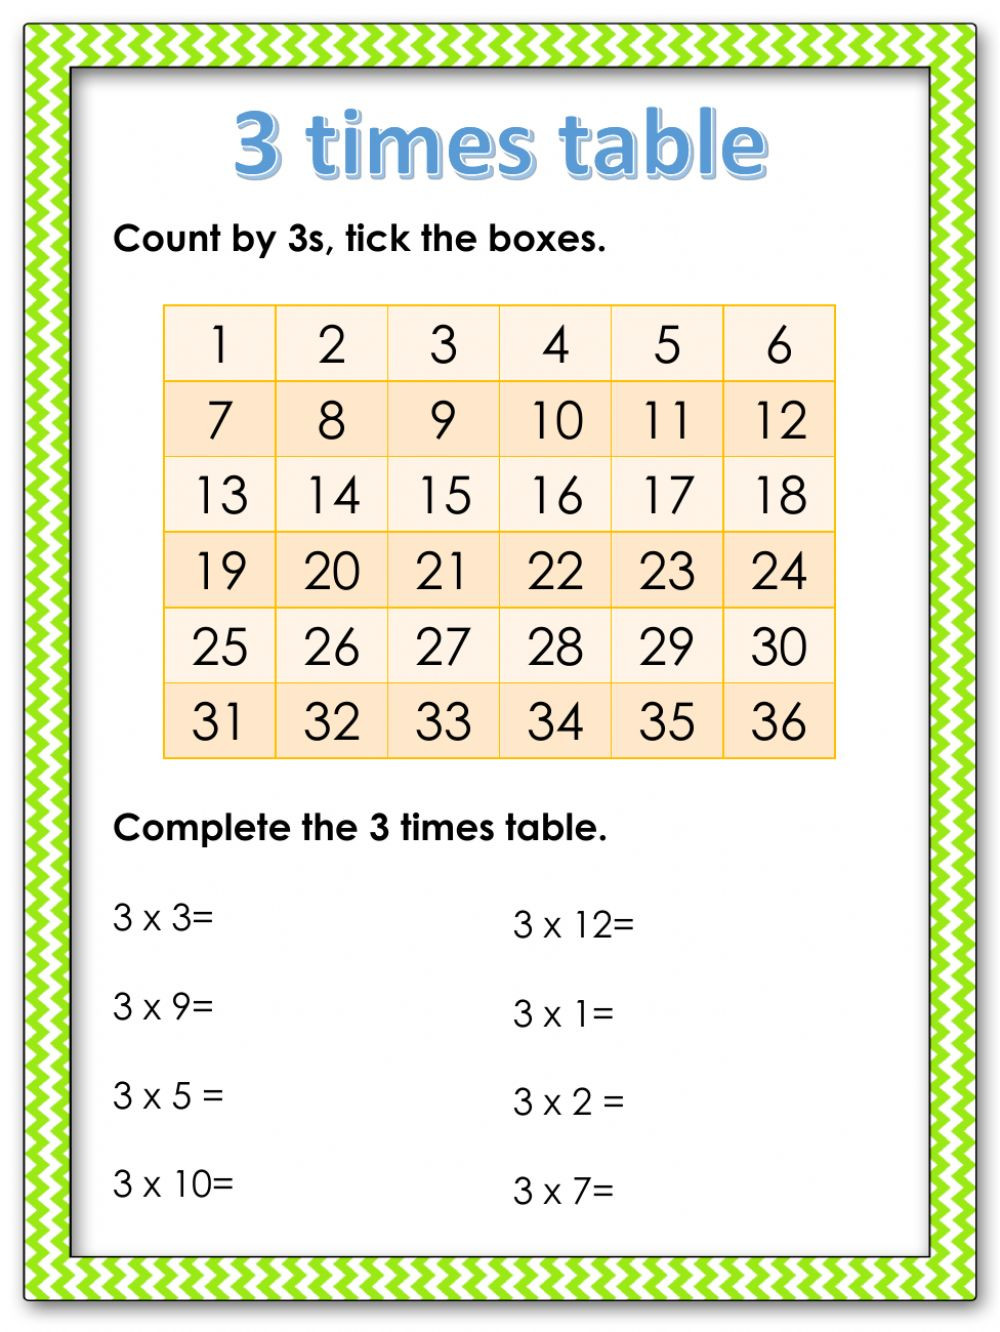 6 Times Table Worksheet 3 Times Table Interactive Worksheet